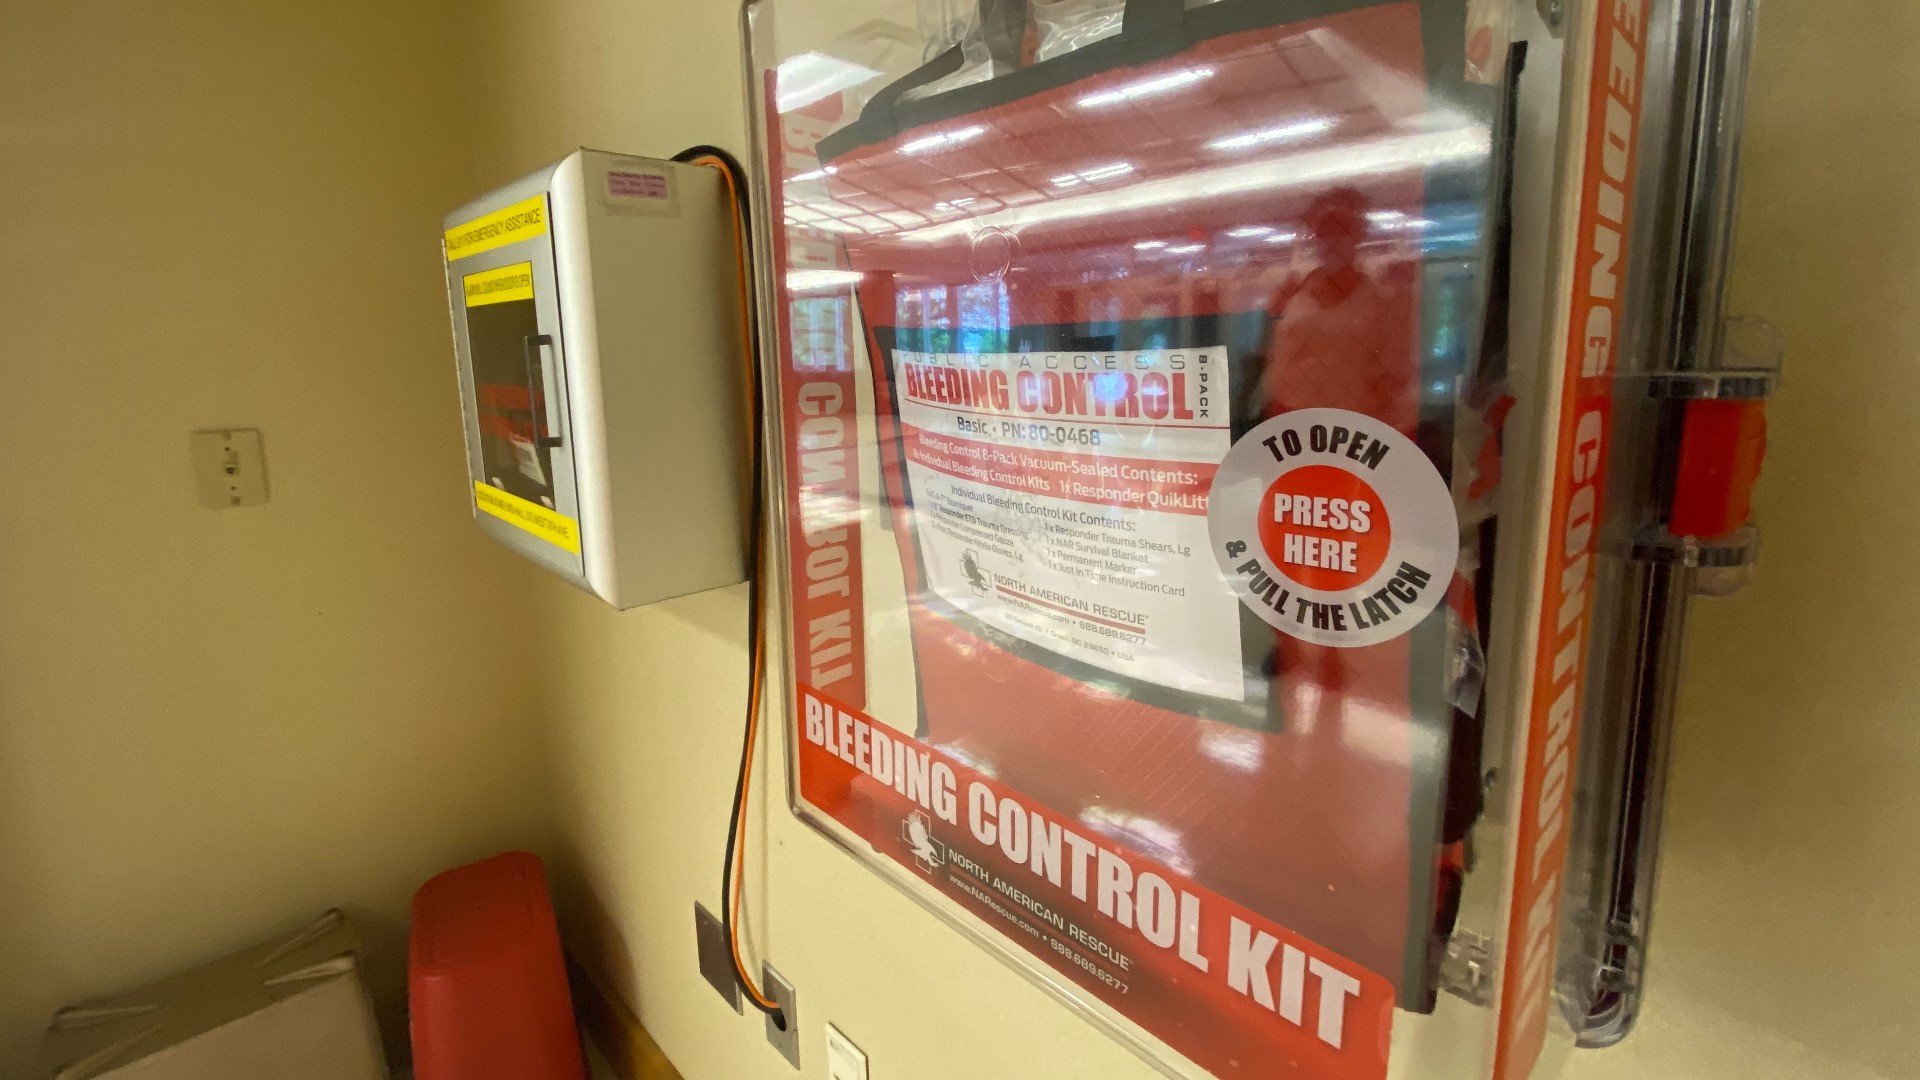 Walking through the campus at The Ohio State University Wexner Medical Center, you may come across “Stop the Bleed” kits.